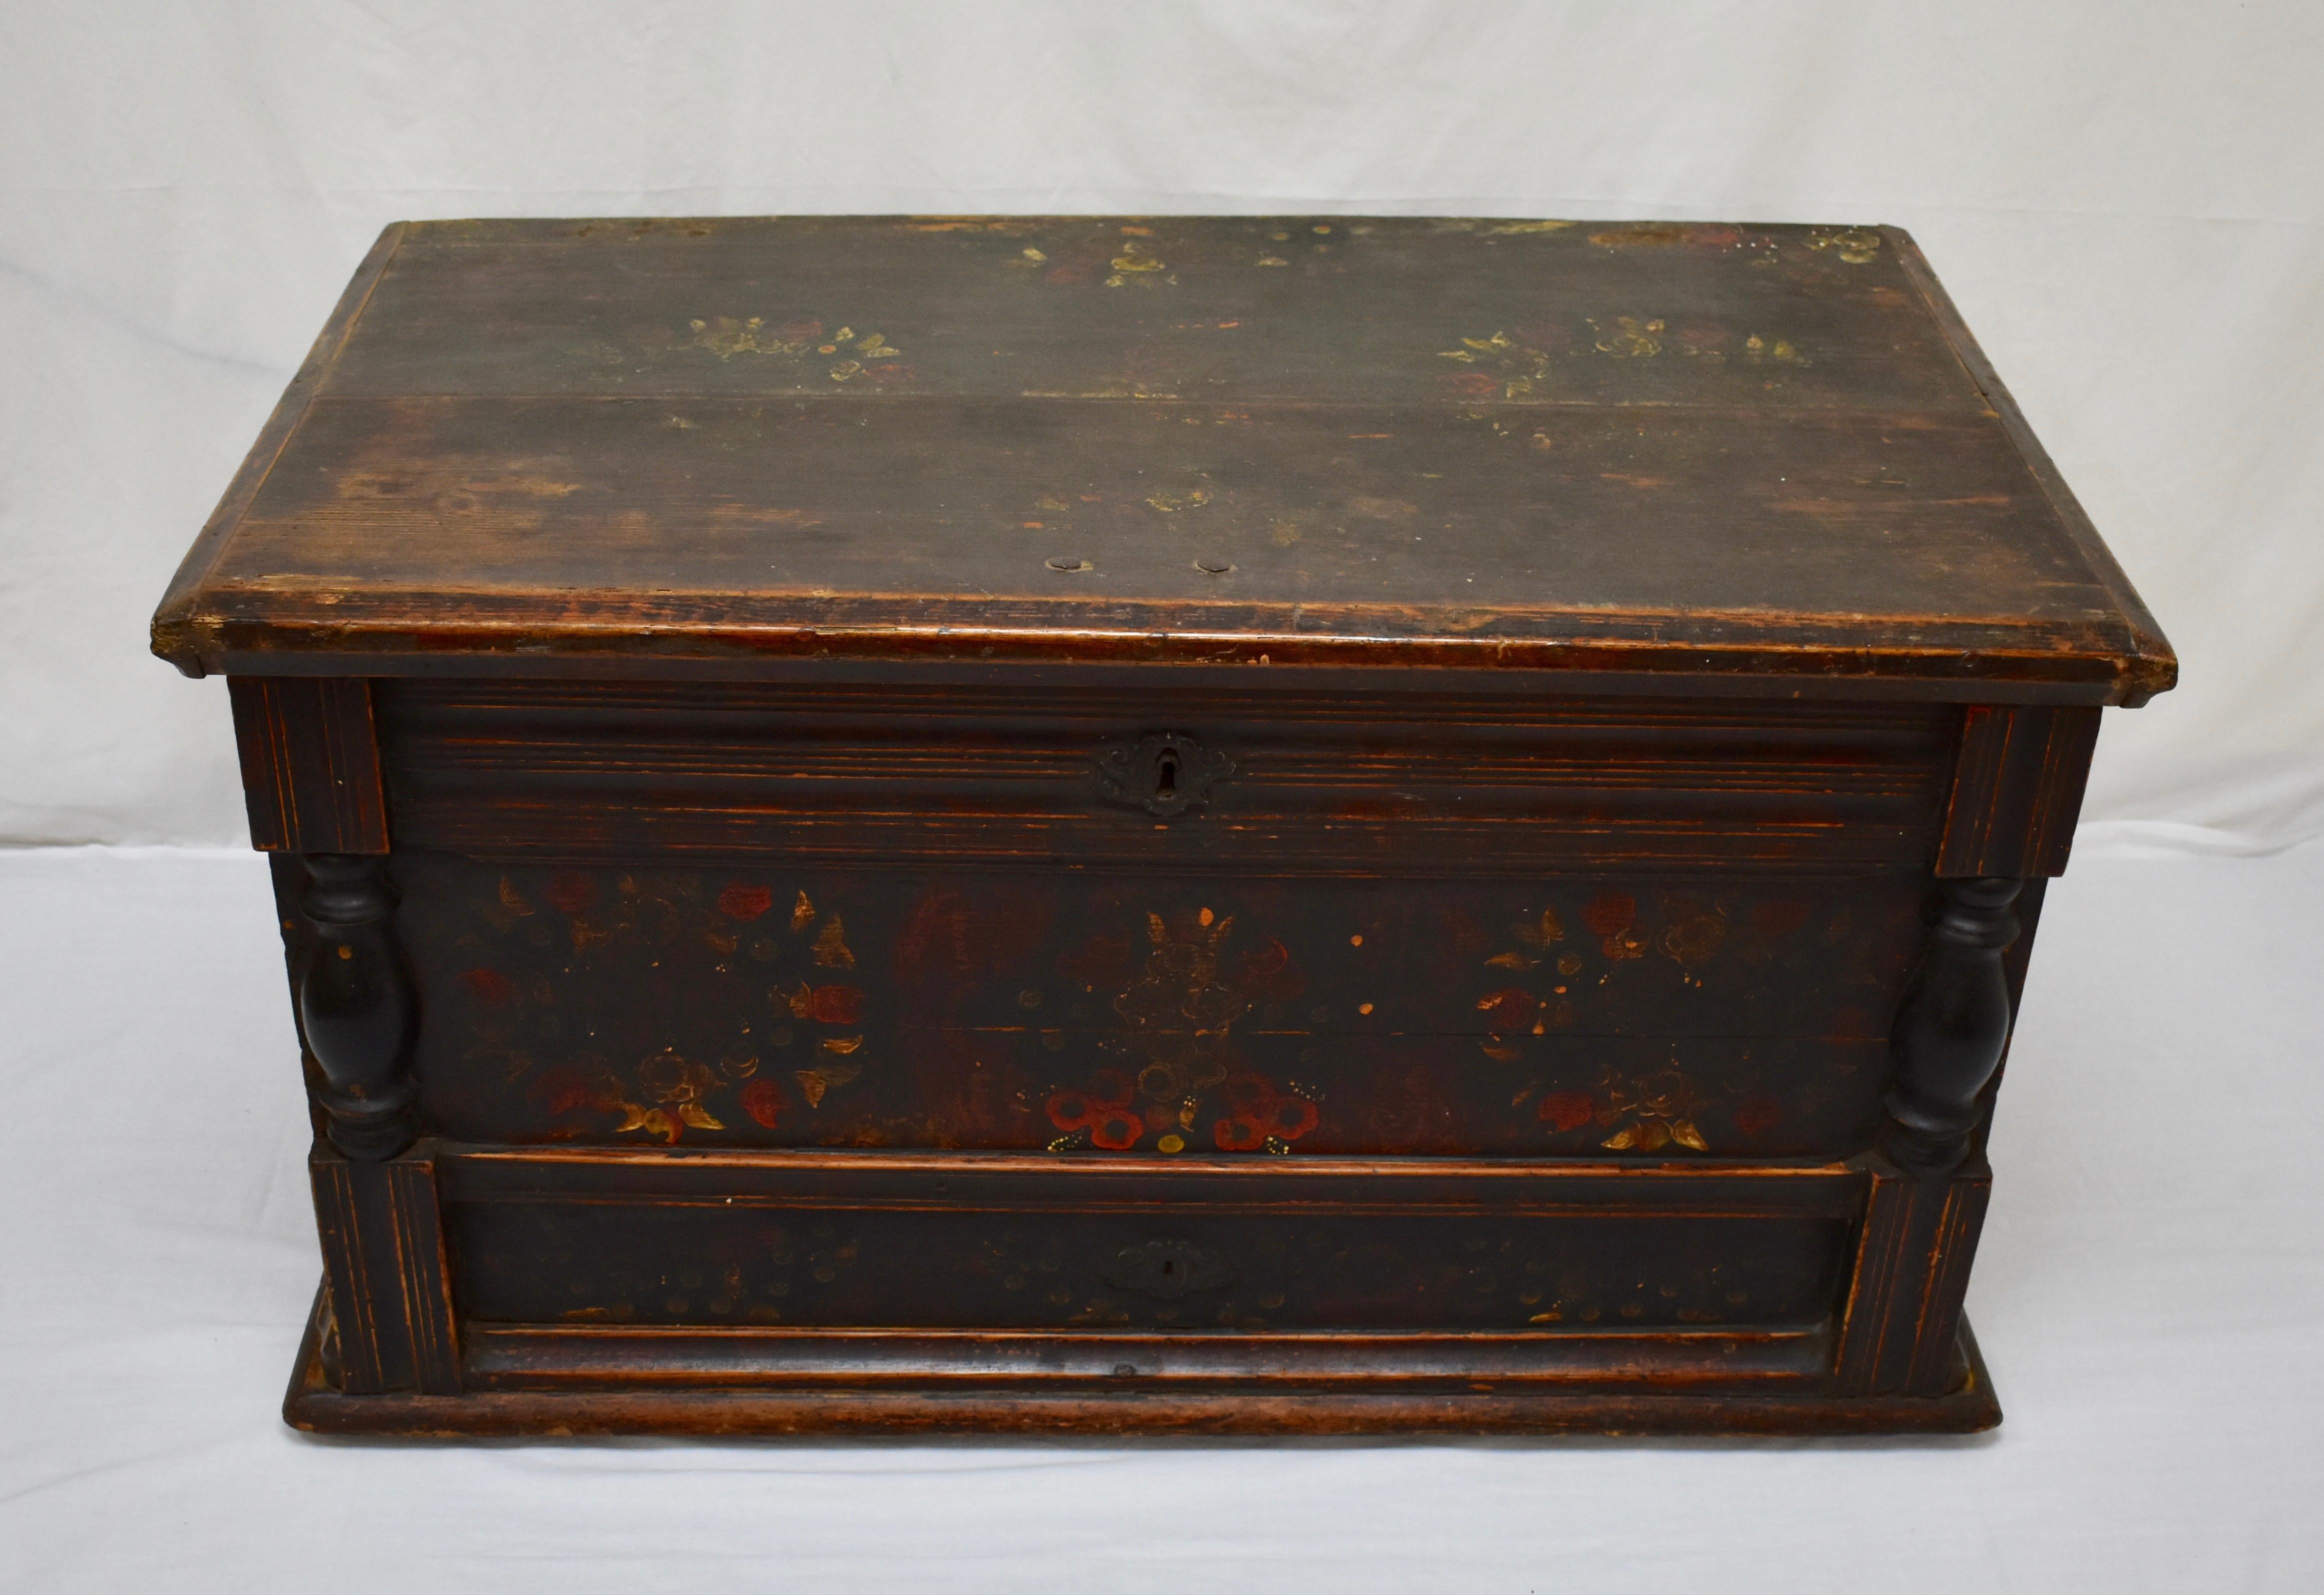 This large and handsome Baroque style pine trunk is built from stock over 1” thick and is in the form of a faux mule chest, that is, the lower front panel masquerades as a drawer. The upper front panel is boldly fluted from side to side, while the